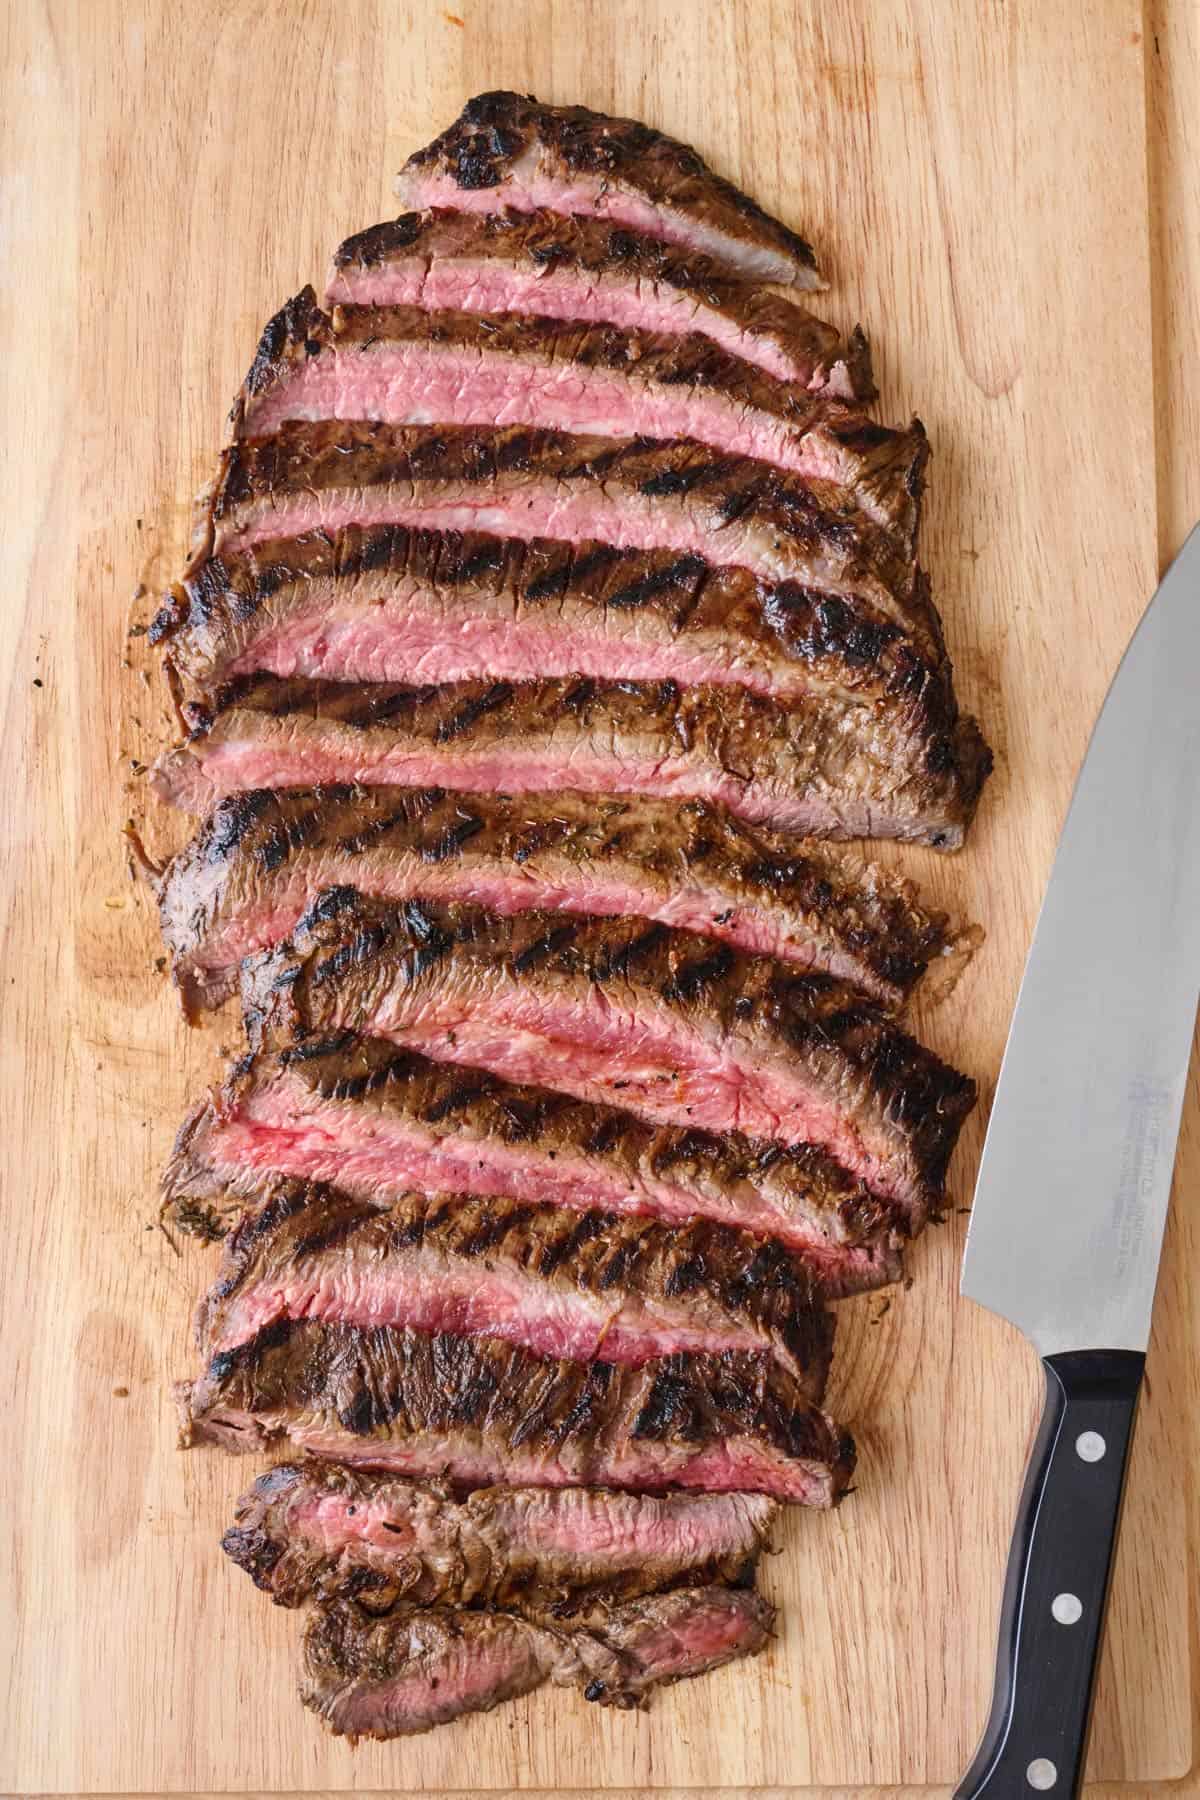 Tutorial for how to cut flank steak against the grain.